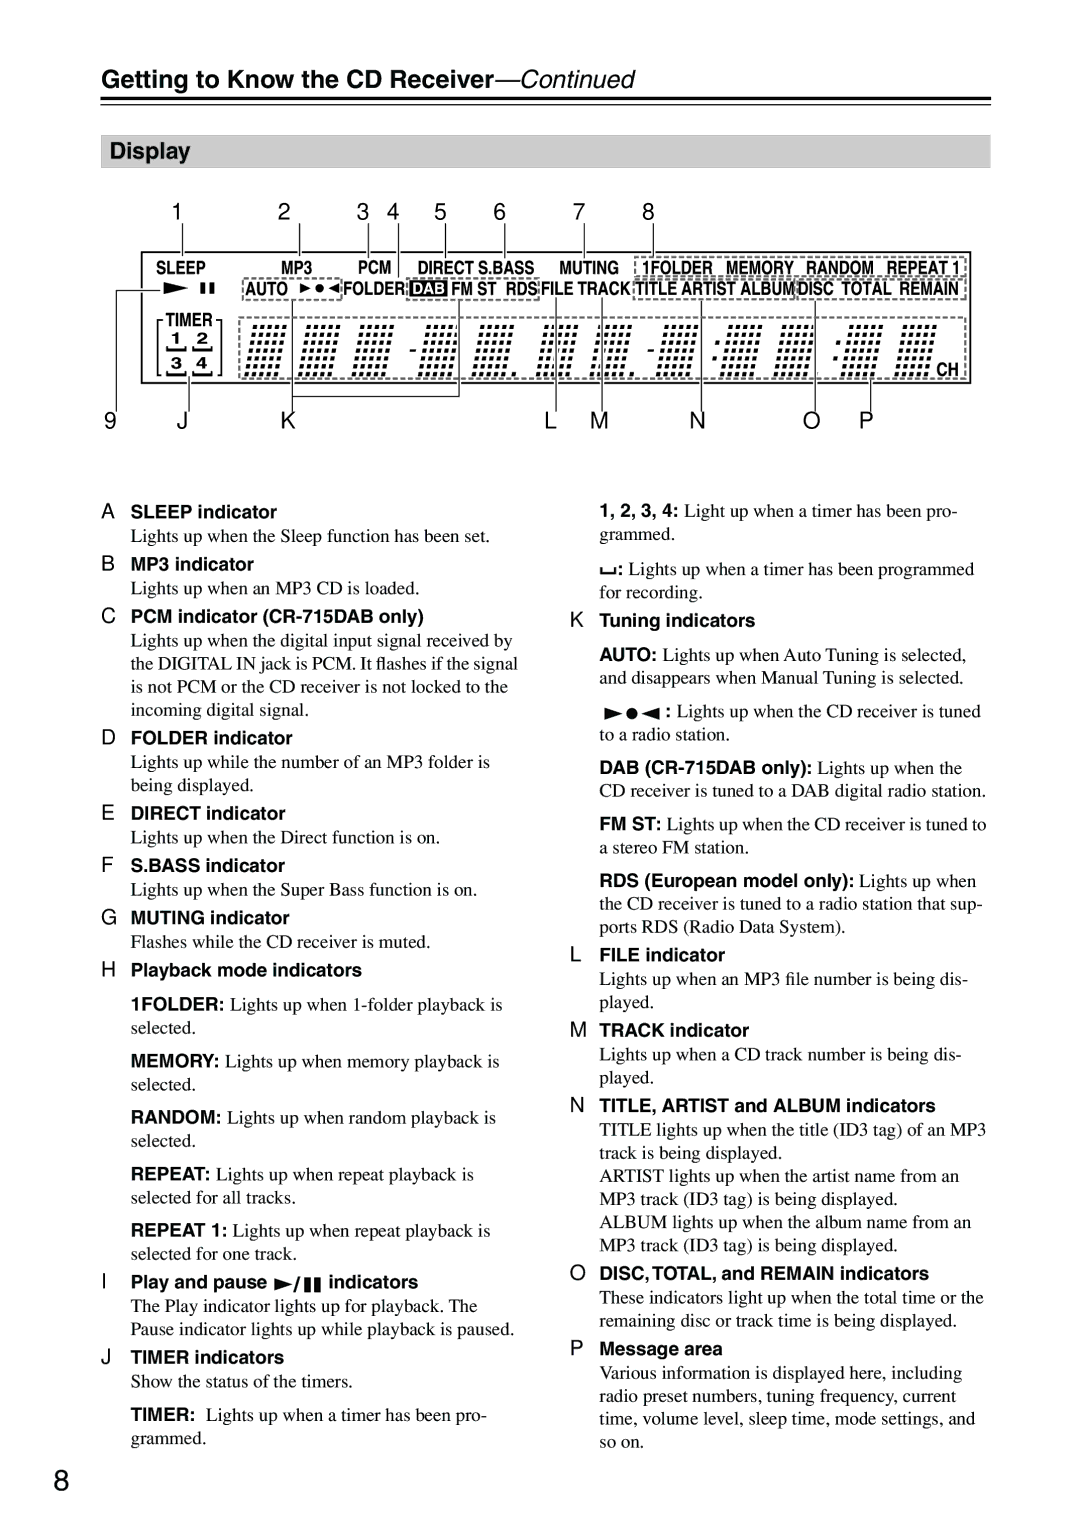 Onkyo CR-715DAB instruction manual Getting to Know the CD Receiver, Display 